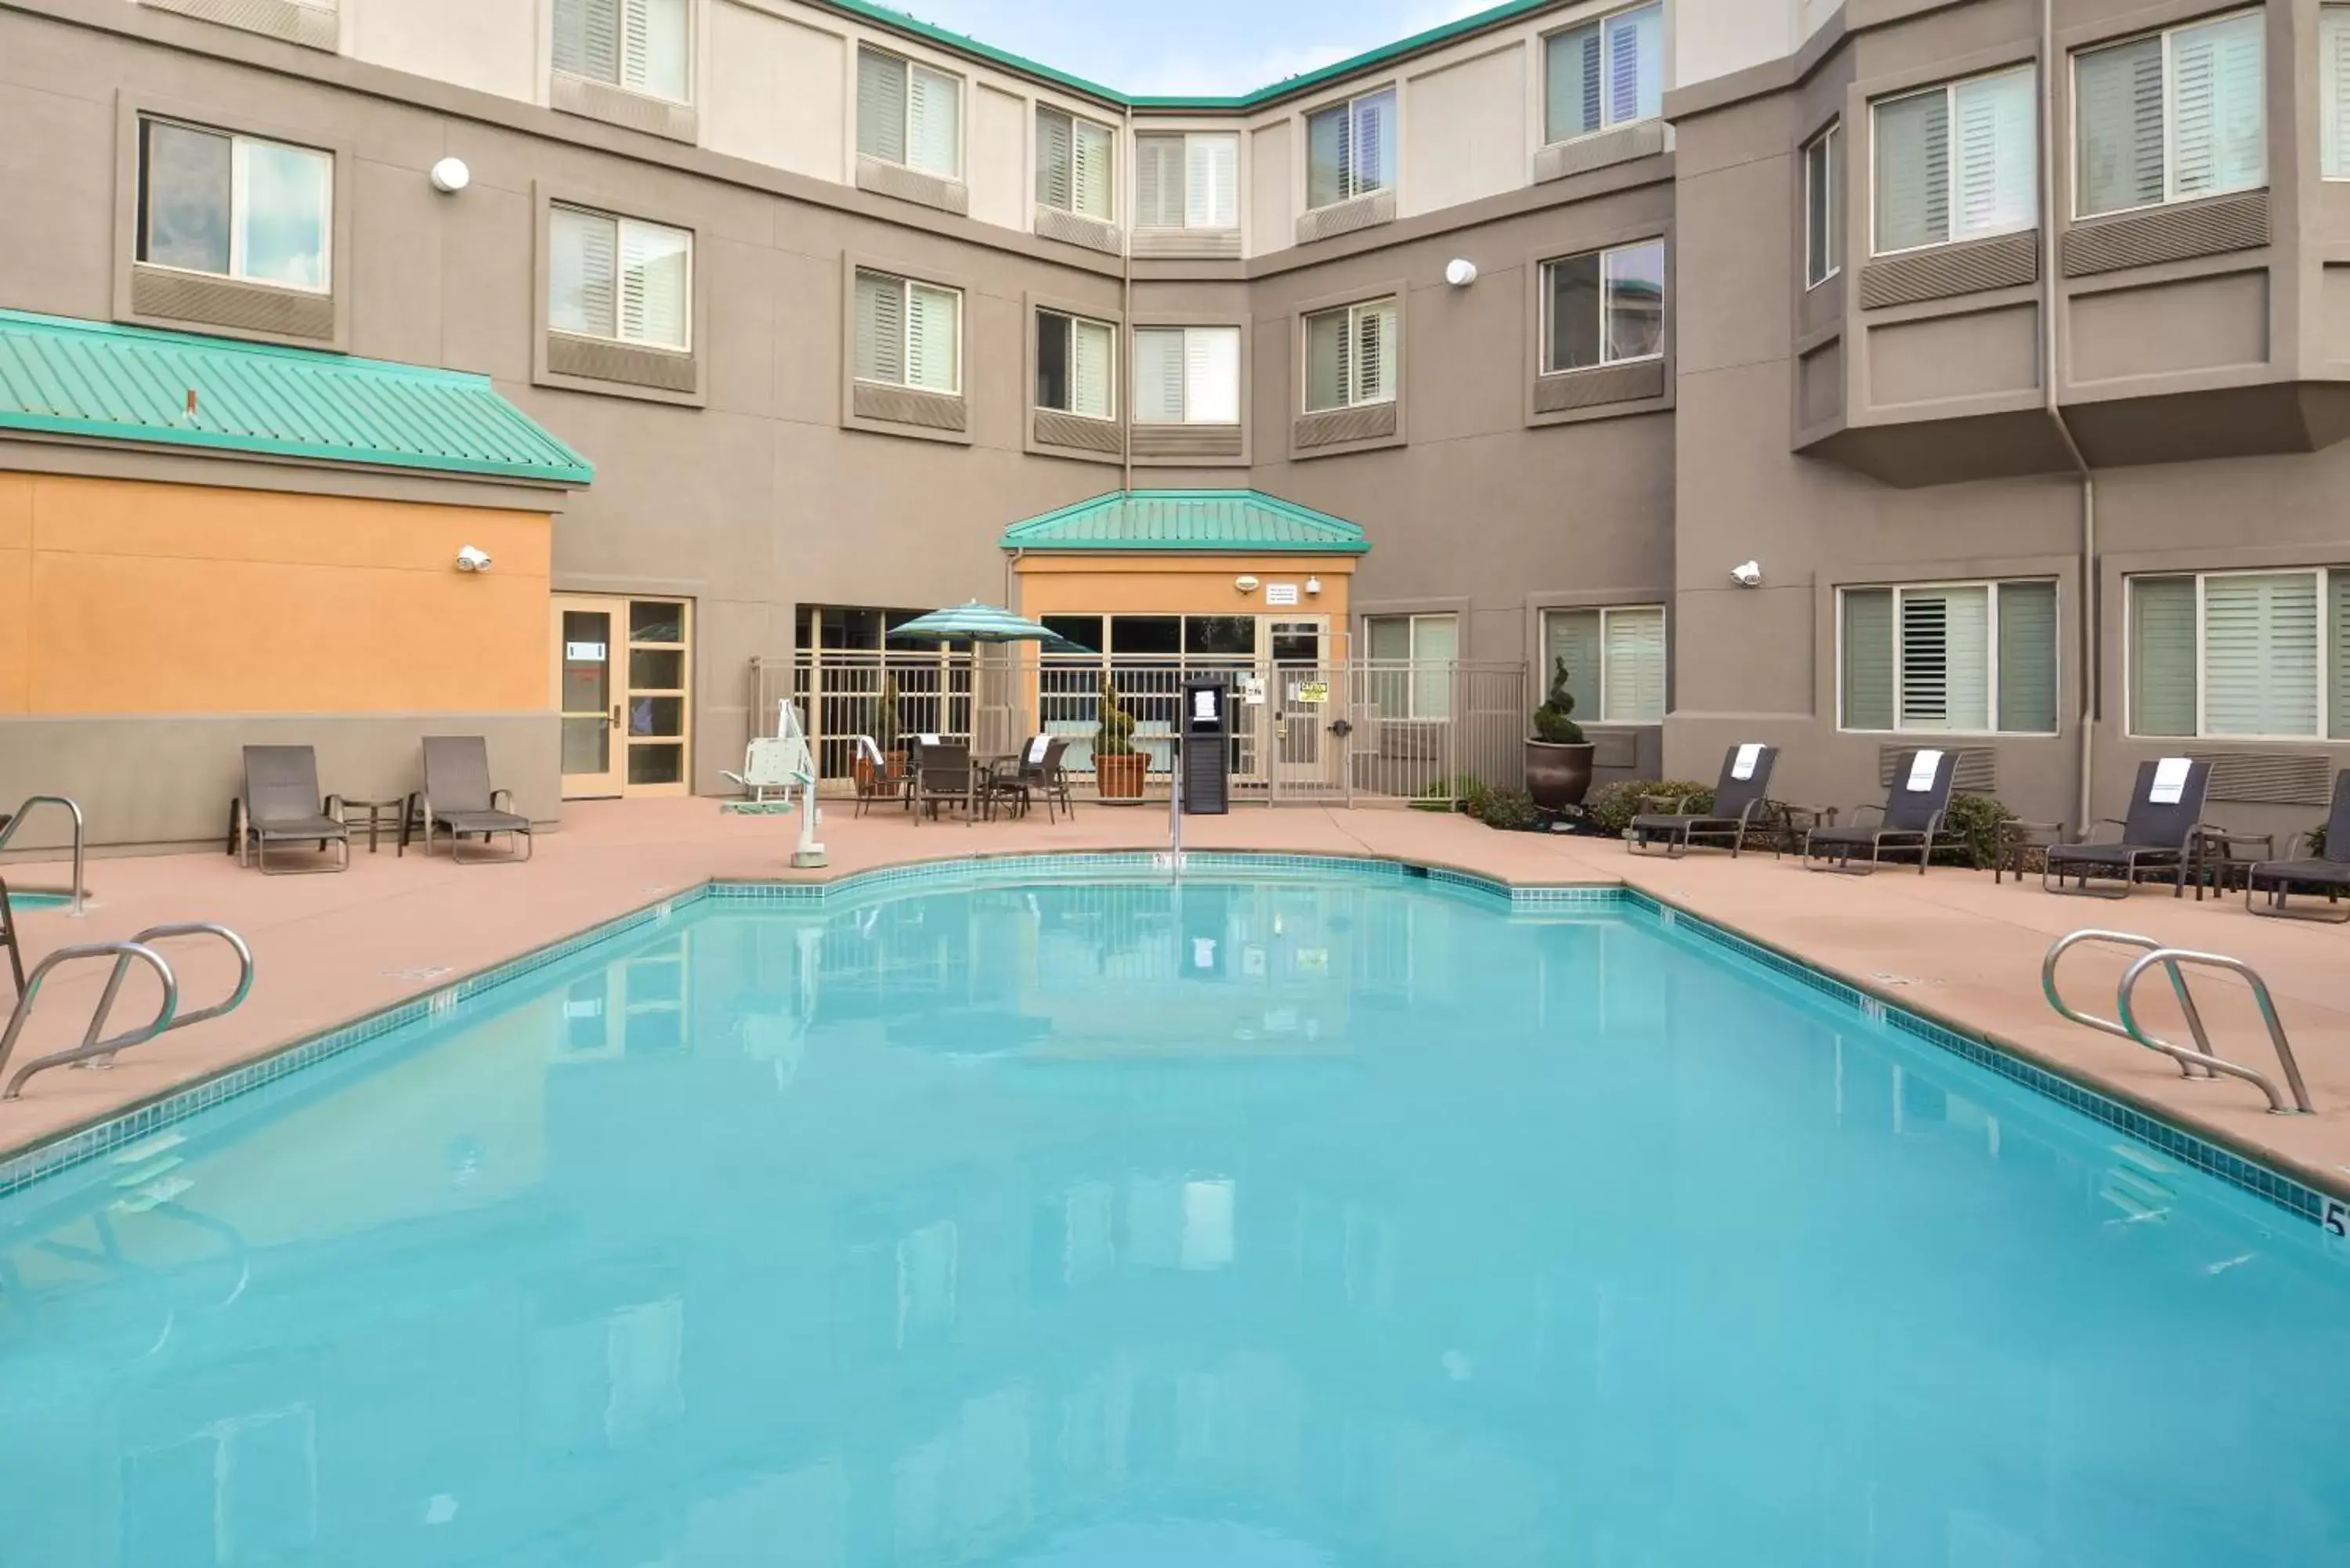 Swimming Pool in HOLIDAY INN EXPRESS & SUITES ELK GROVE CENTRAL - HWY 99, an IHG Hotel